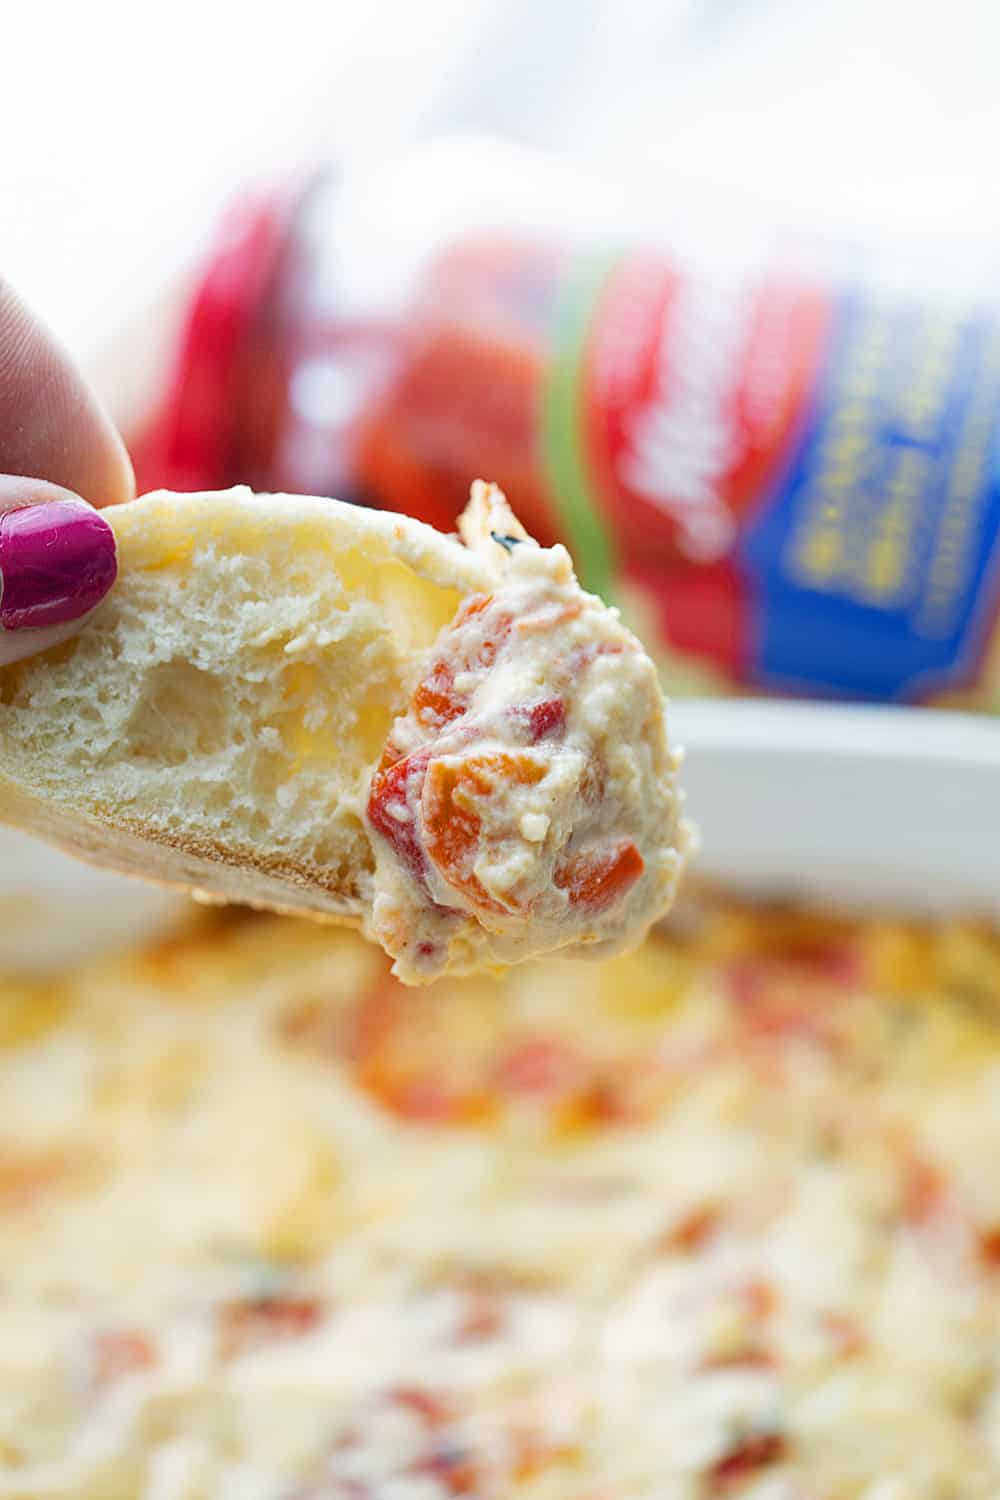 Hot Roasted Red Pepper Dip - Planning a summer staycation? #ad Make sure to add some hot roasted red pepper dip to the schedule. In fact, it's so good, you'll want to list it twice! The rich, smoky flavor of @Mezzetta roasted red peppers take this creamy, cheesy, flavorful dip to an entirely new level—a totally tasty, gotta-have-it level! #Mezzetta #halfscratched #hotdip #hotappetizer #appetizer #baking #cooking #vegetarian